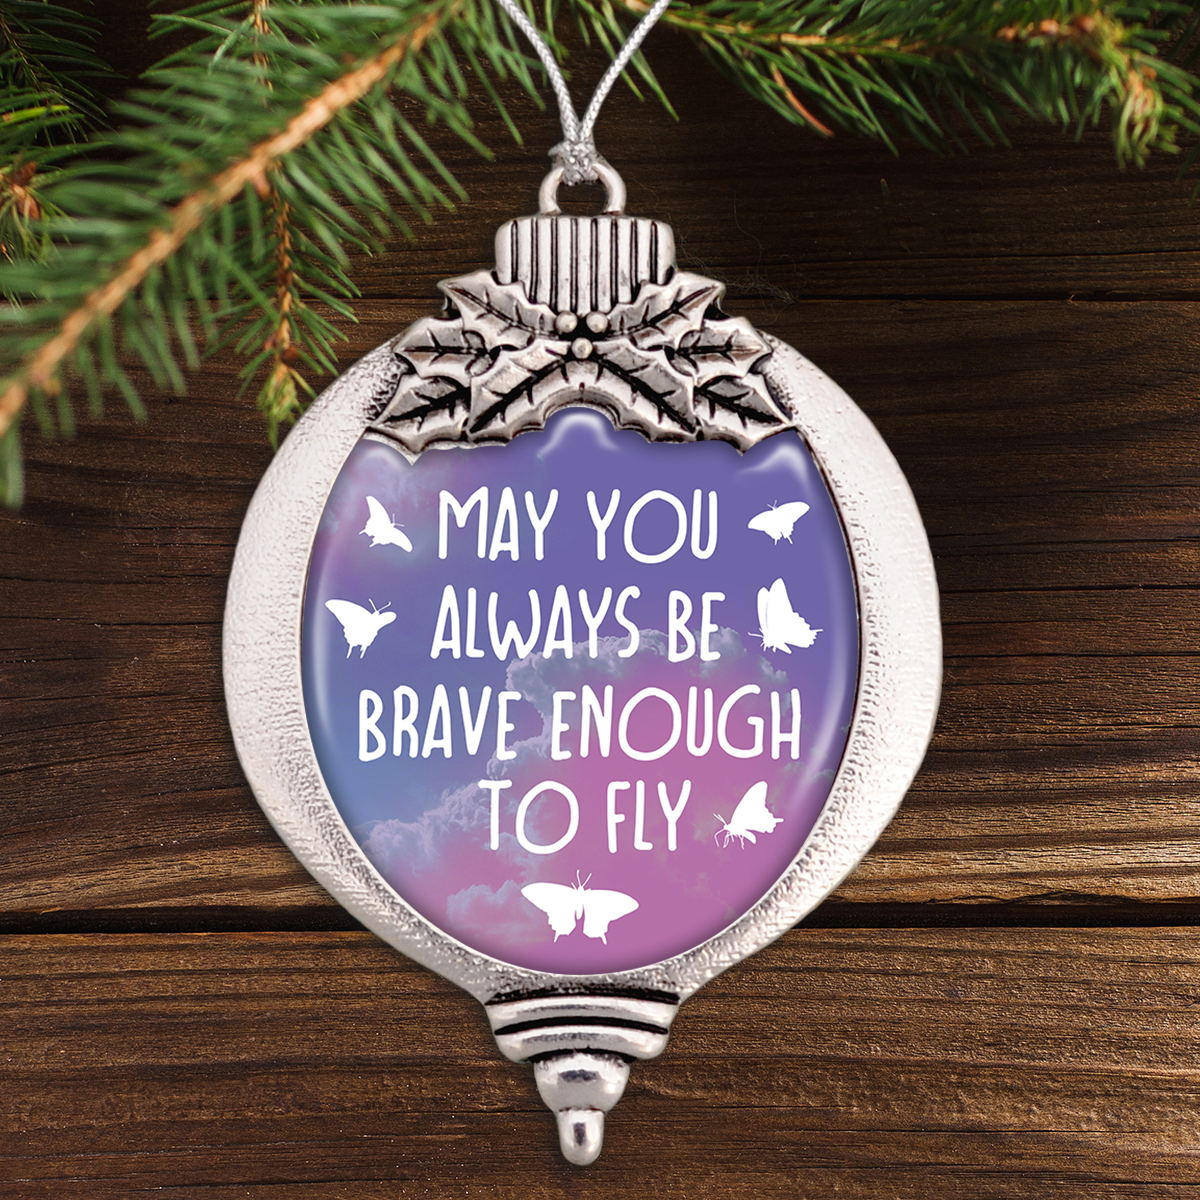 May You Always Be Brave Enough To Fly - Butterfly Bulb Ornament